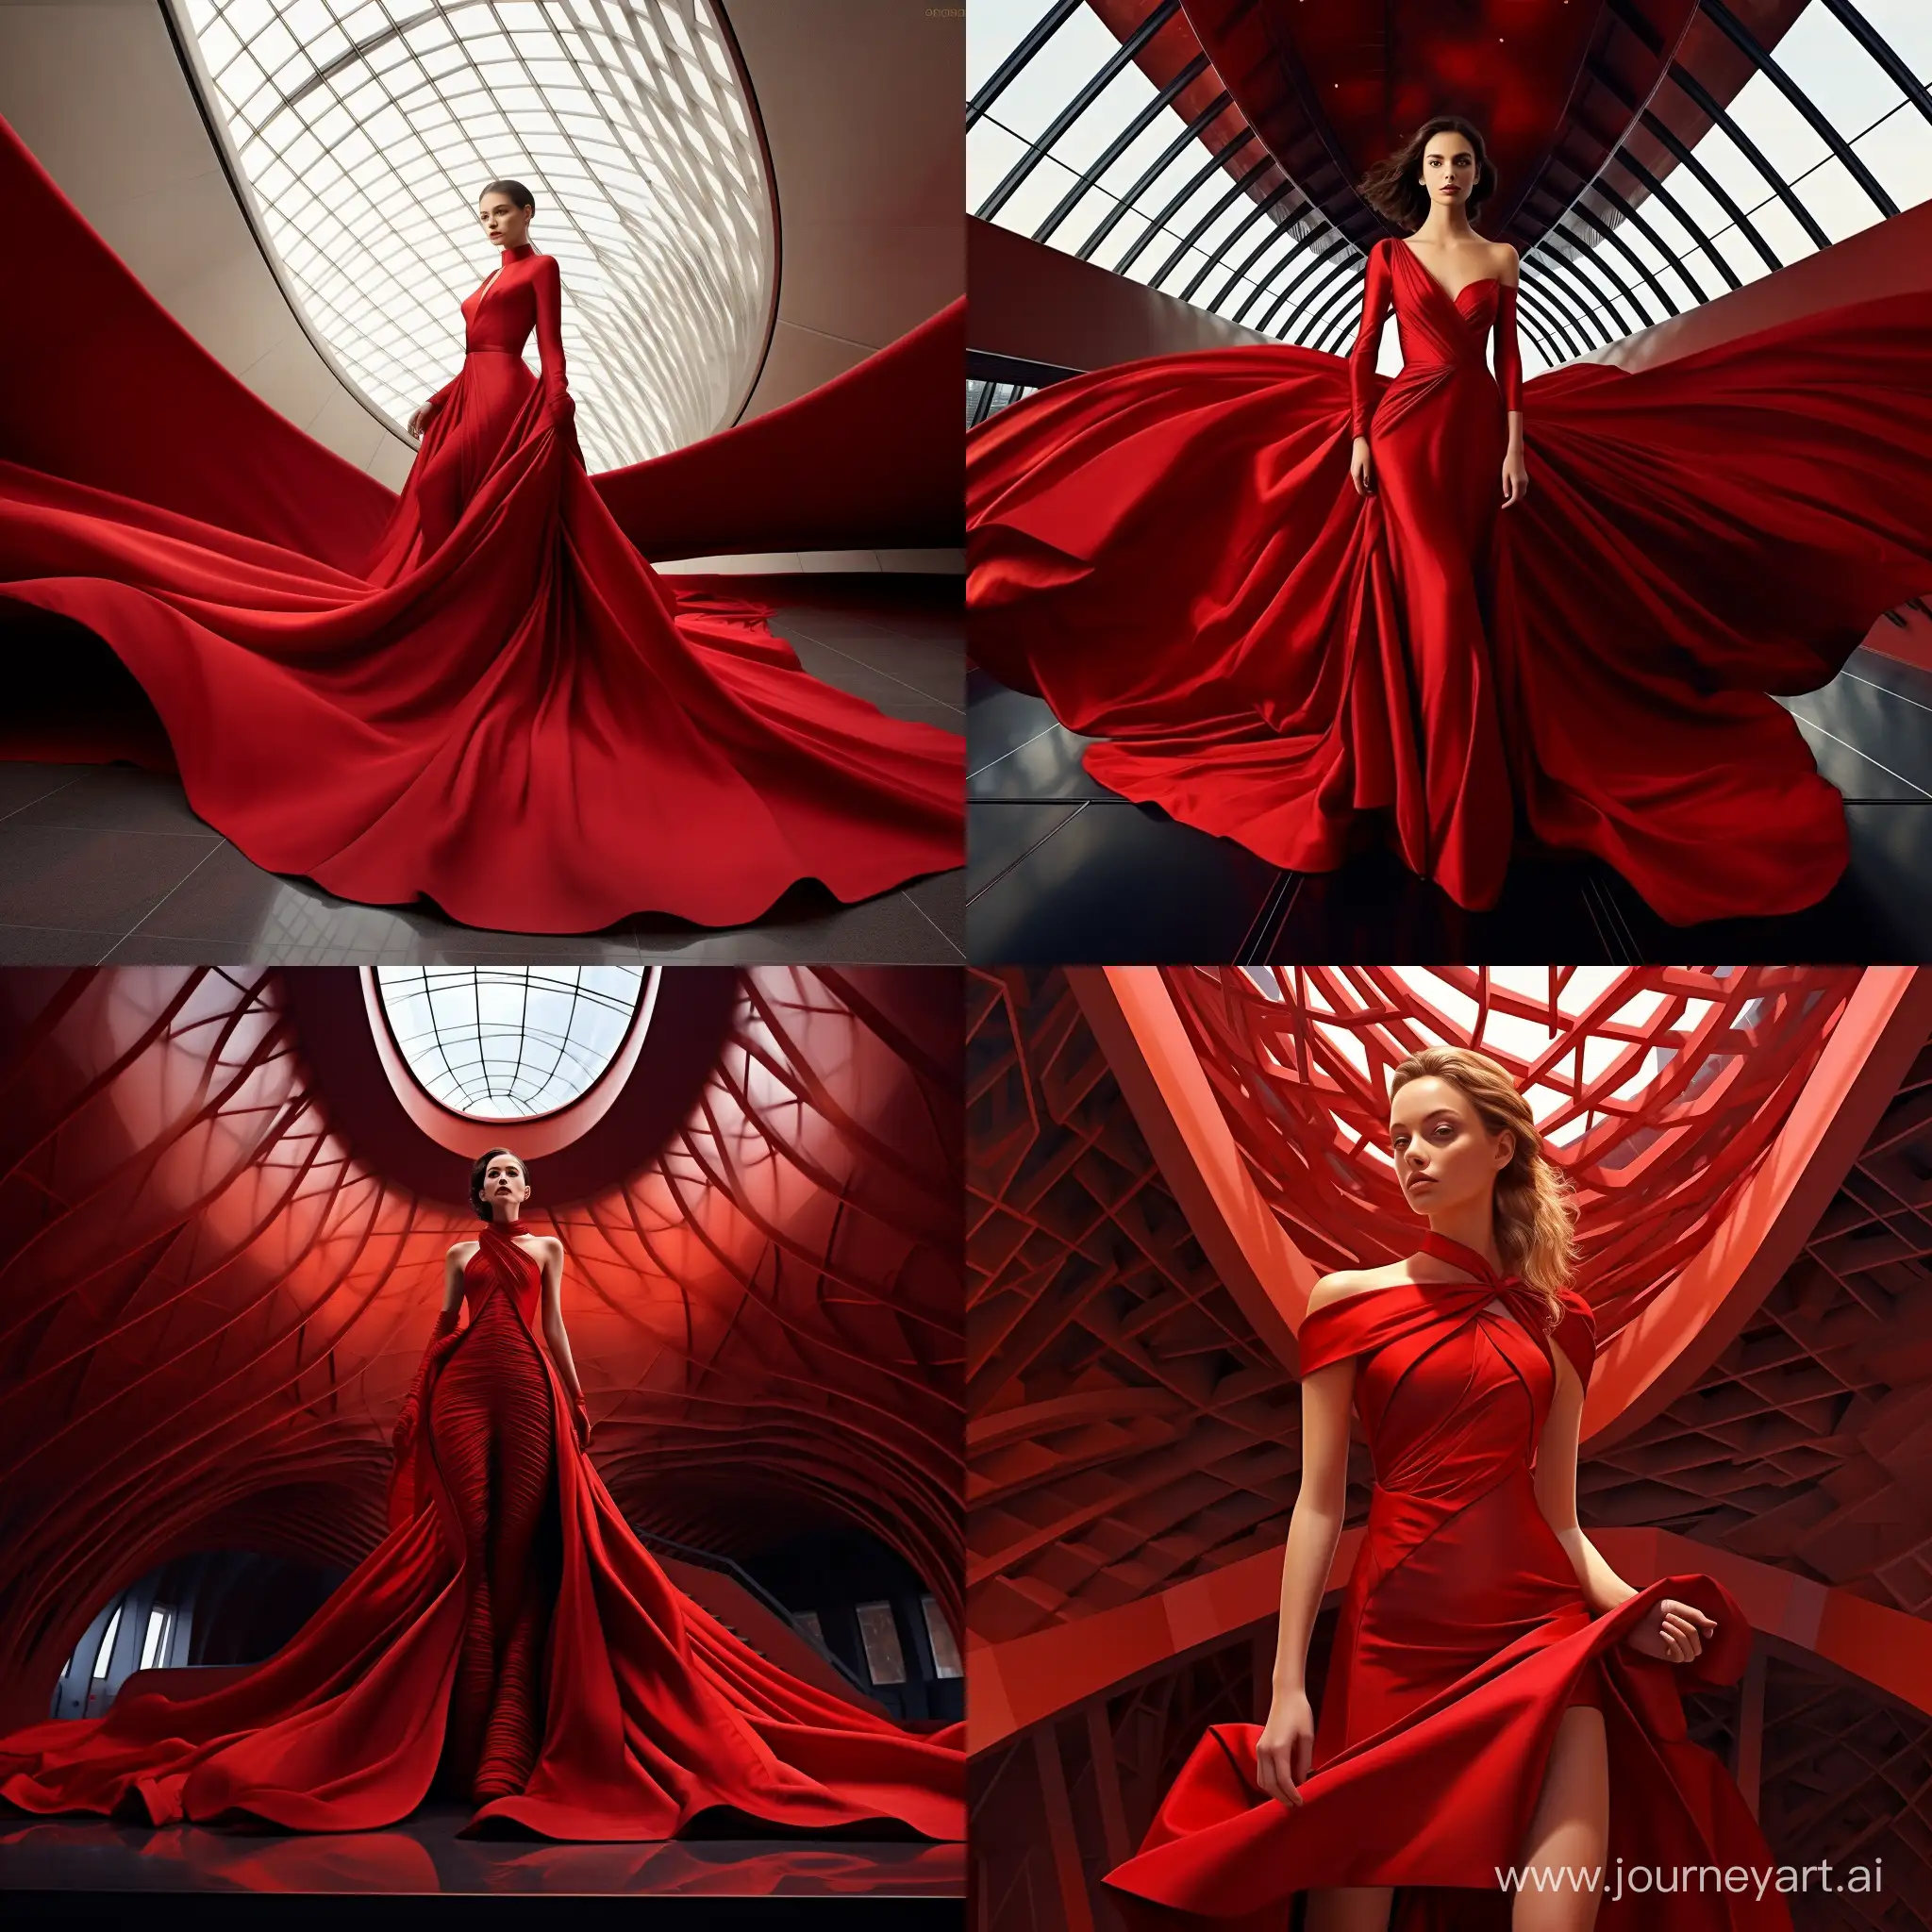 Elegance-Meets-Structure-Red-Glamour-Dress-in-Architectural-Fashion